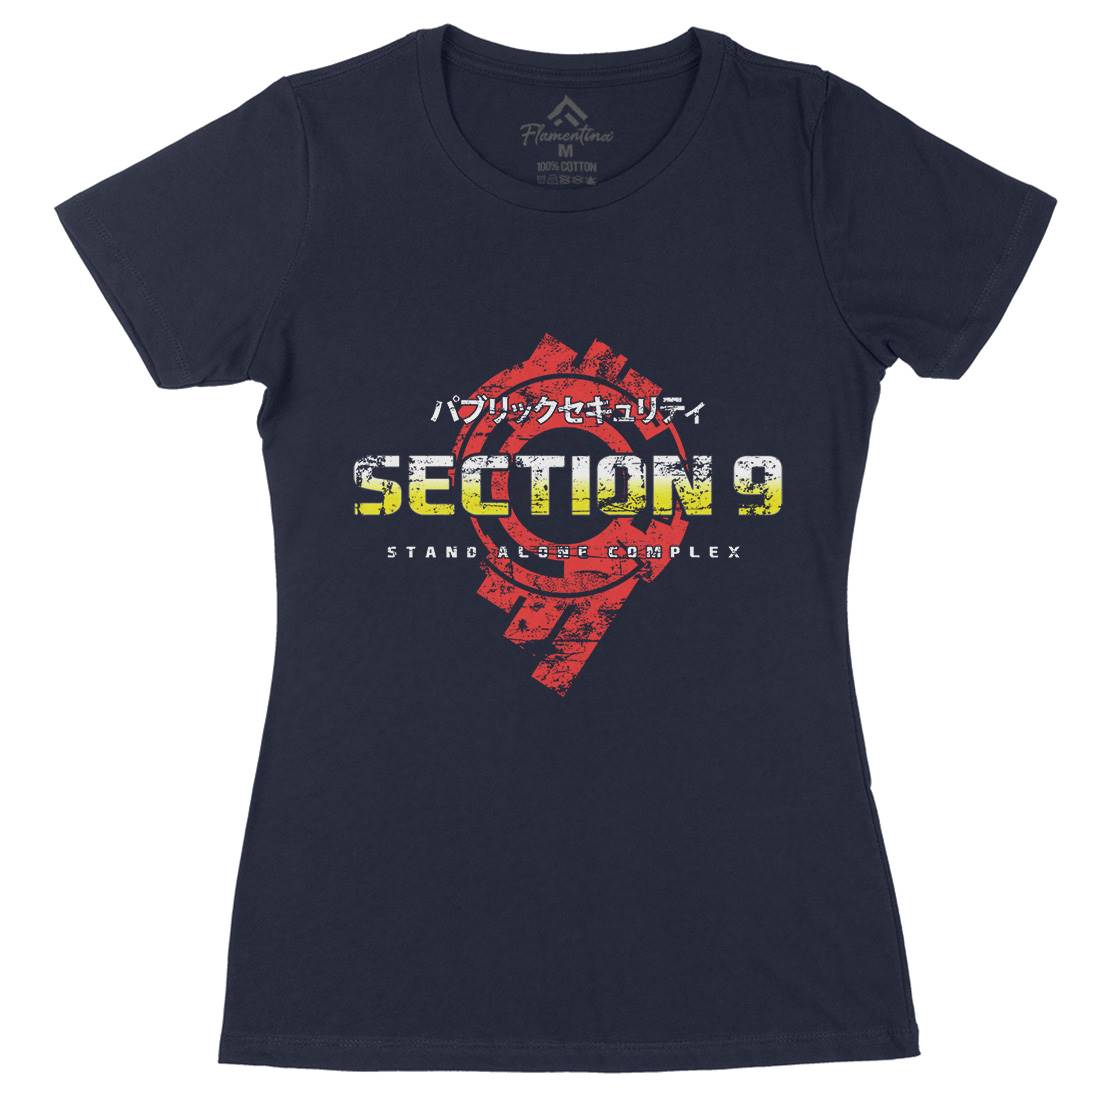 Section 9 Womens Organic Crew Neck T-Shirt Space D193